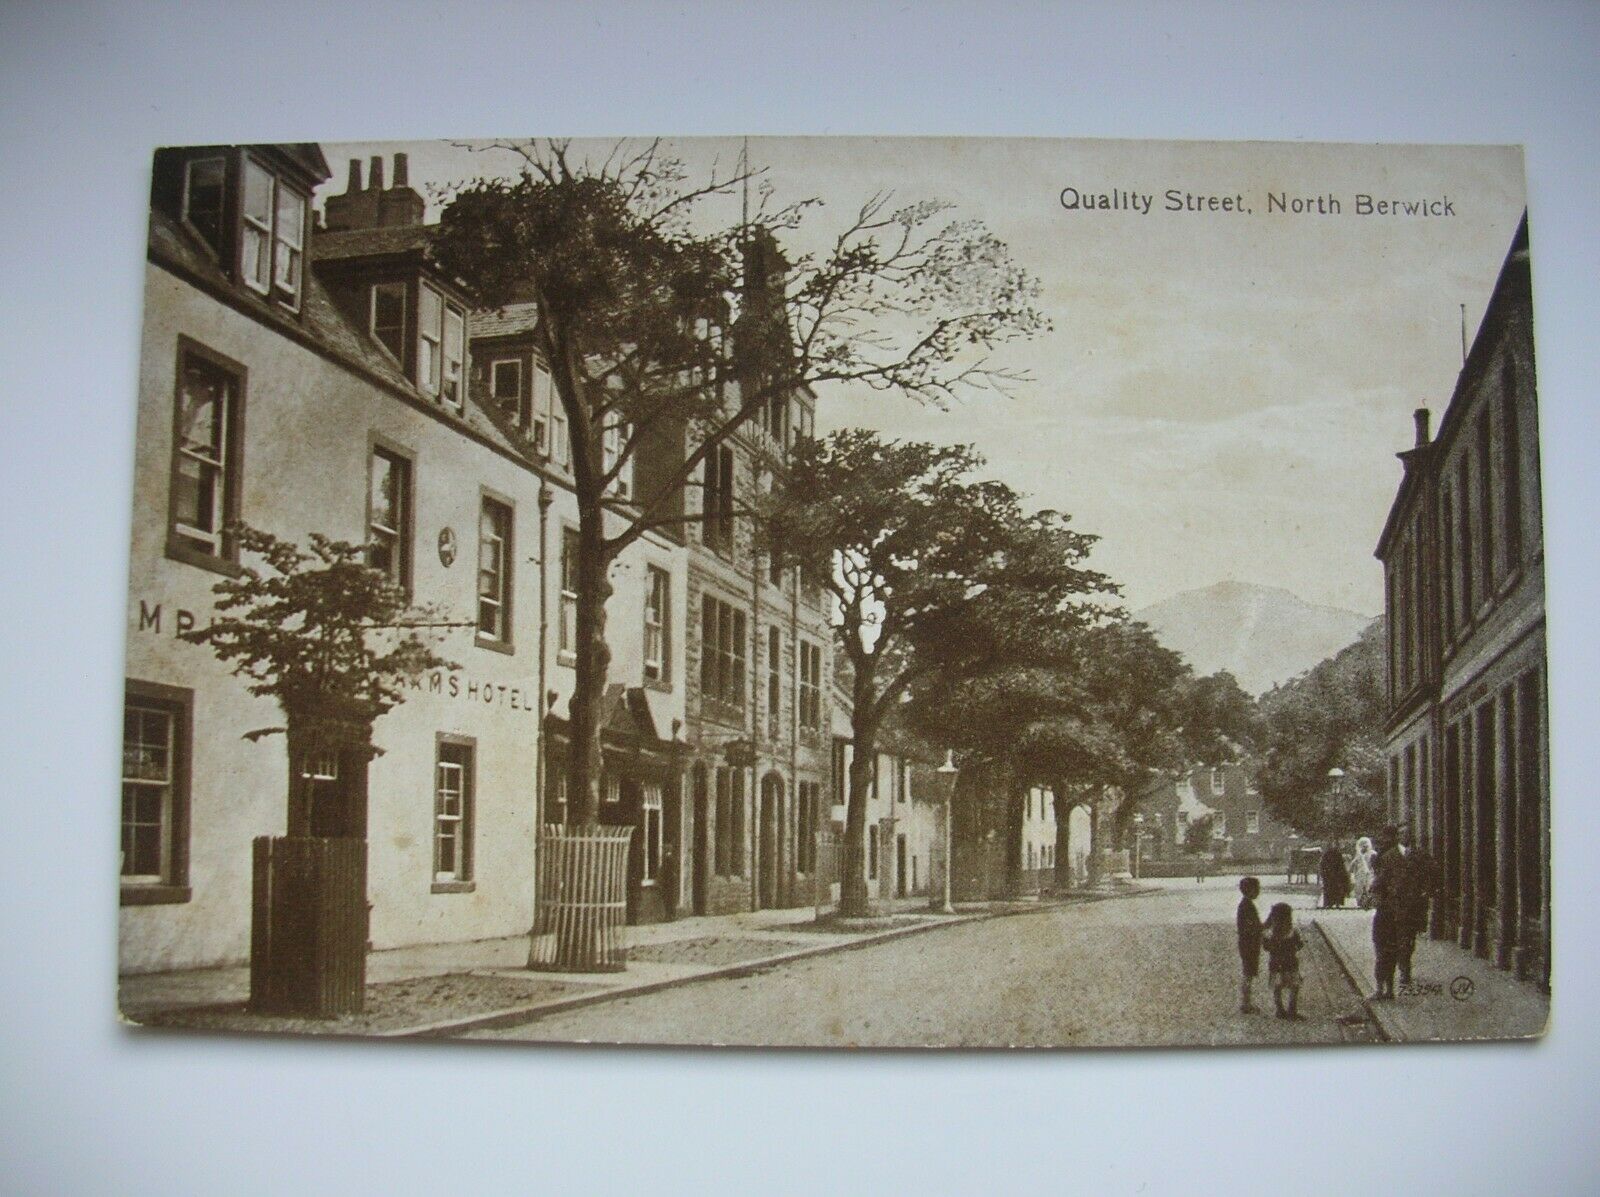 House Clearance - North Berwick, East Lothian – Quality Street. (Very Early 1900s – Horse & Cart)